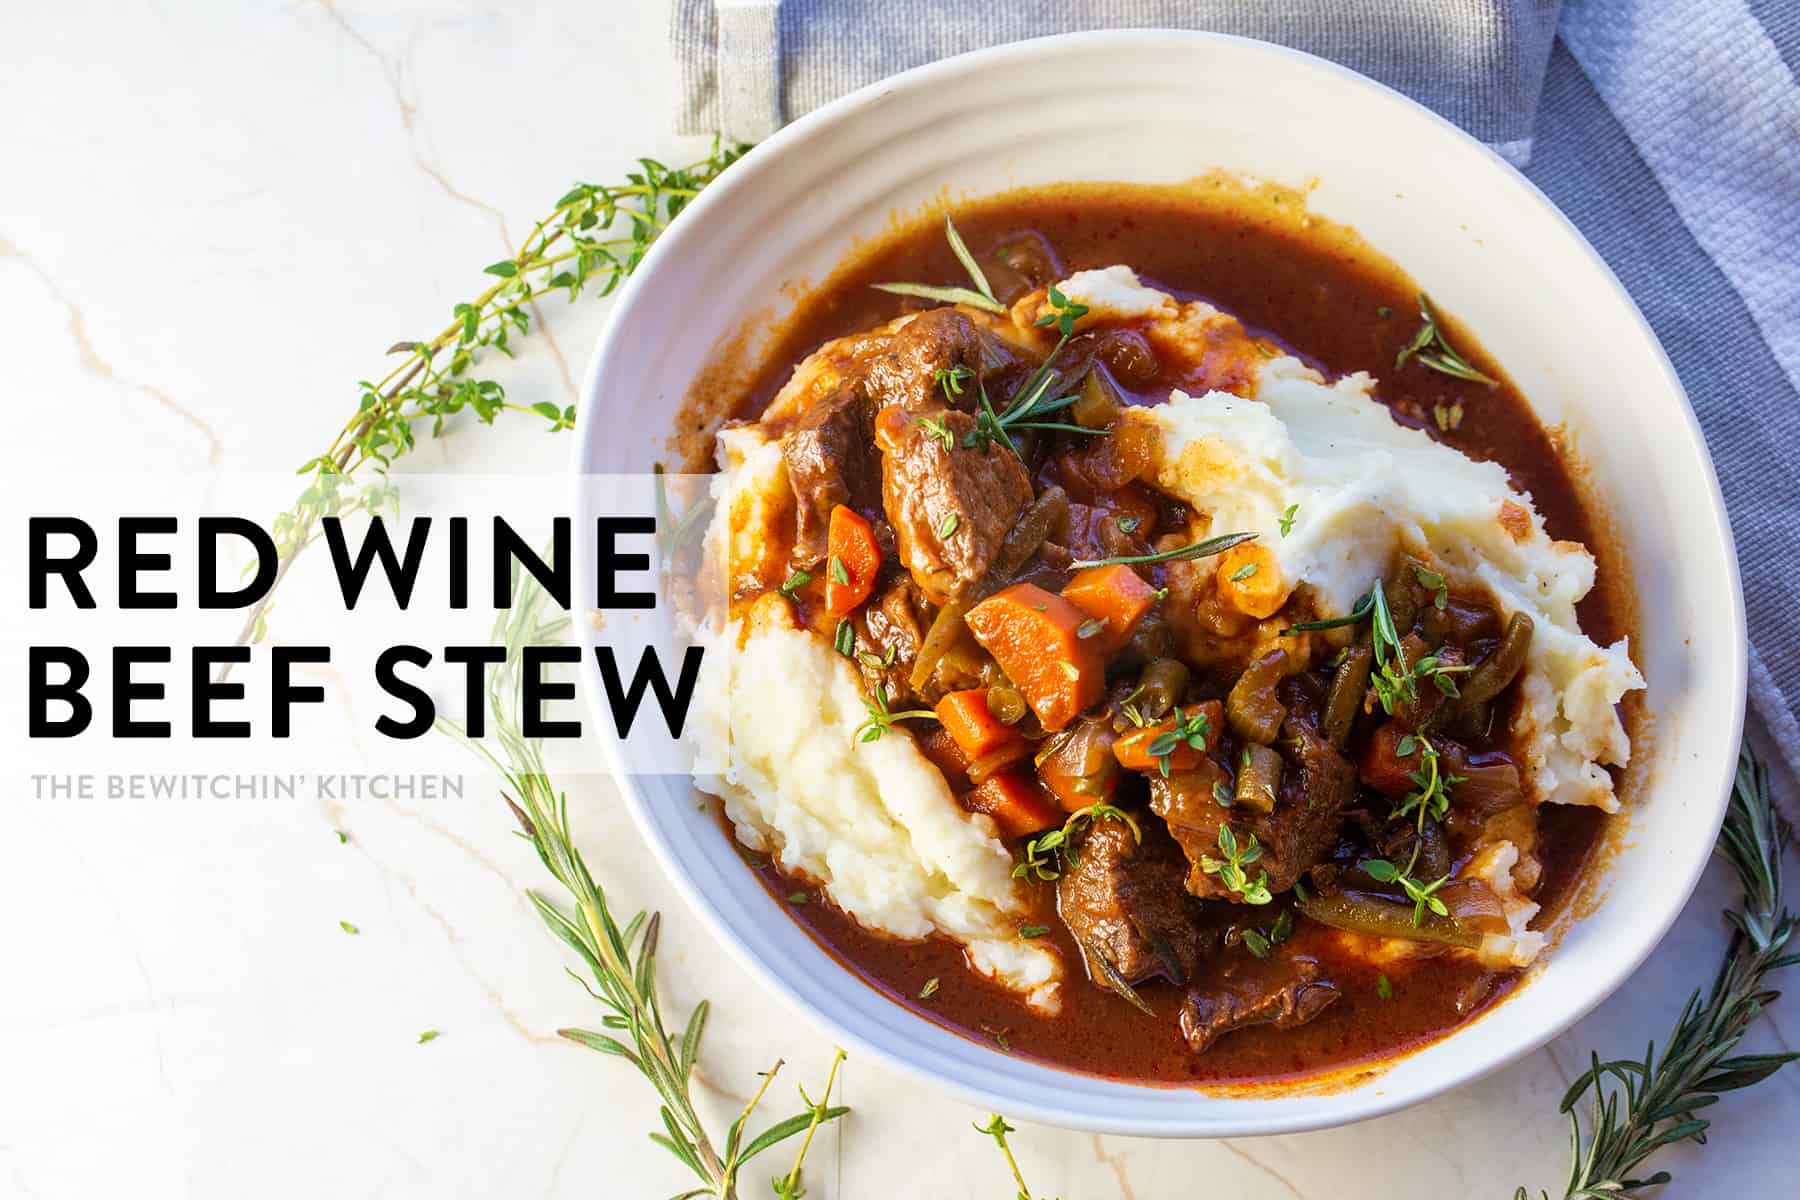 Slow Cooker Beef Stew with Cabernet Merlot